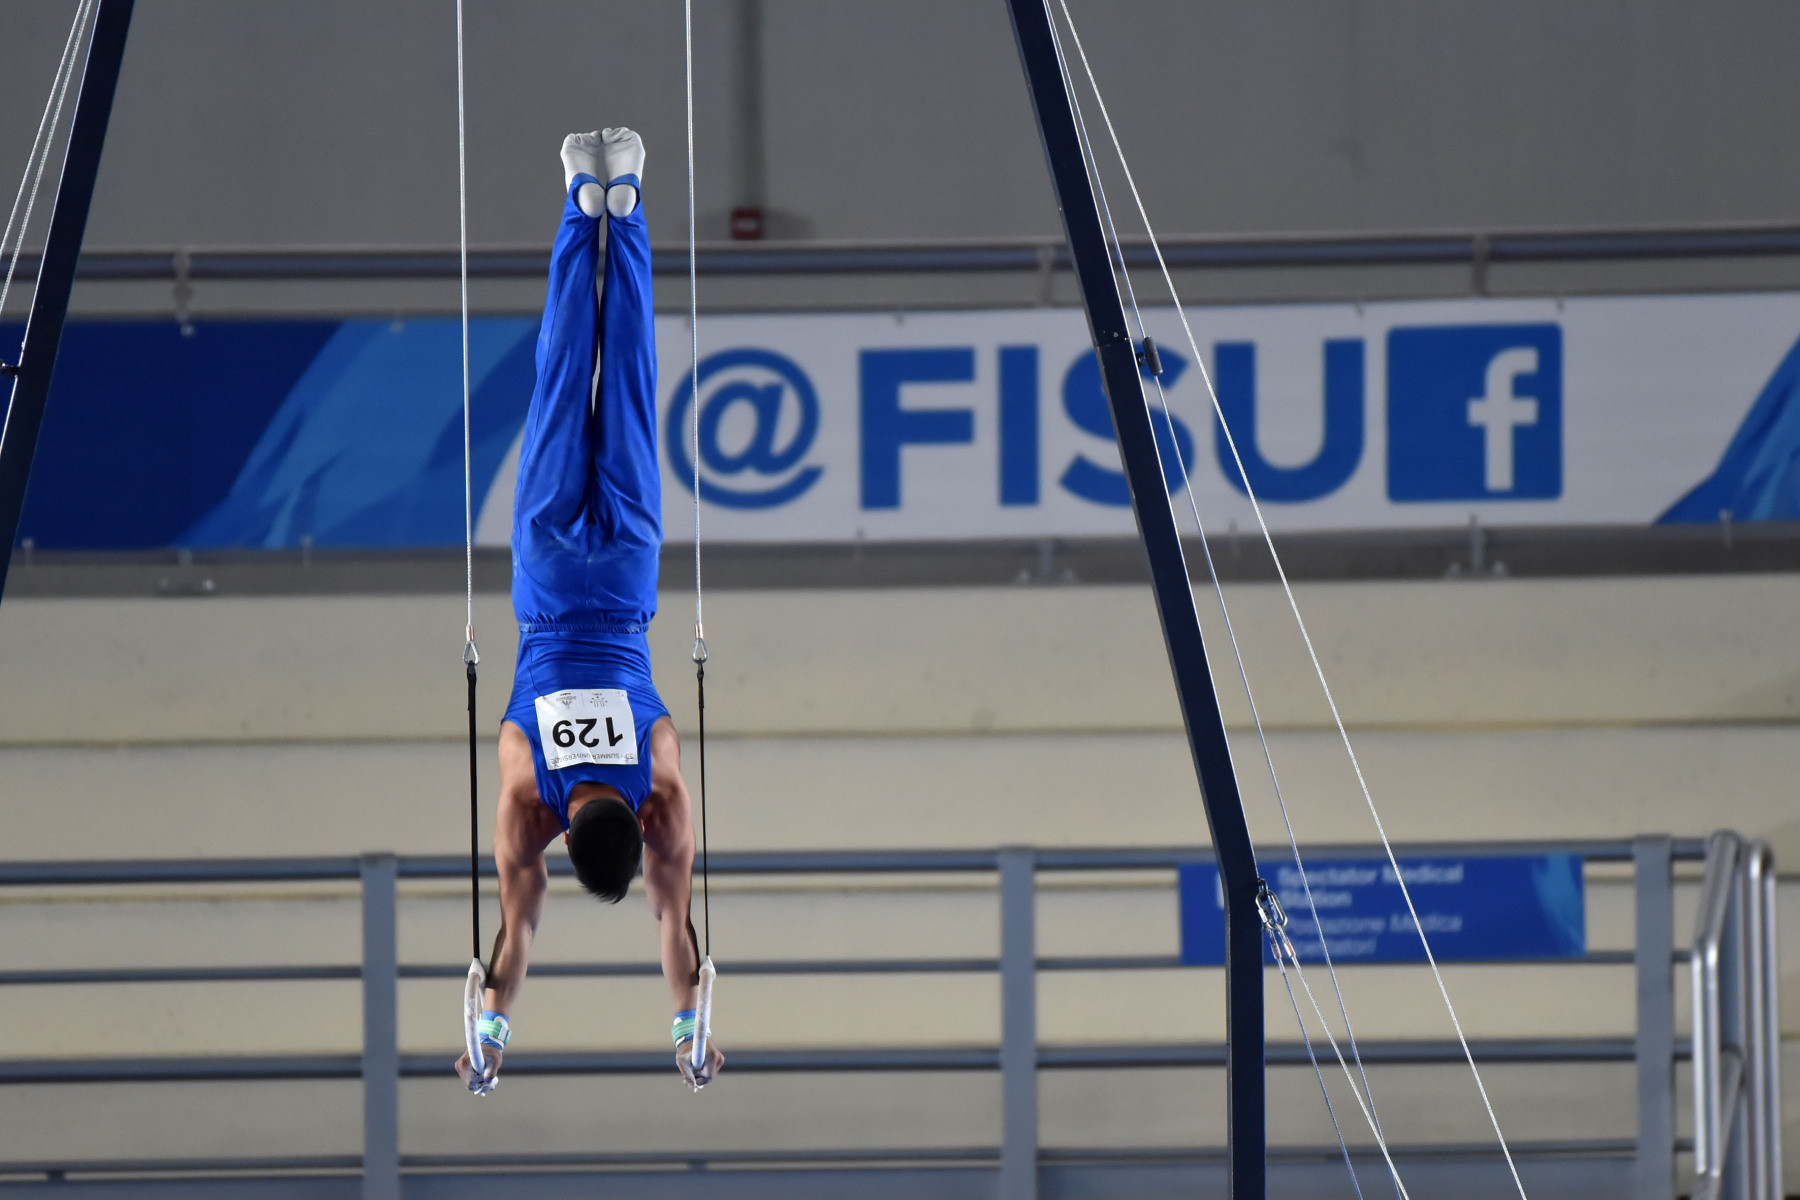 The men's team gold medal was up for grabs, with the winners decided by the results from the men's all-around qualification event ©Naples 2019